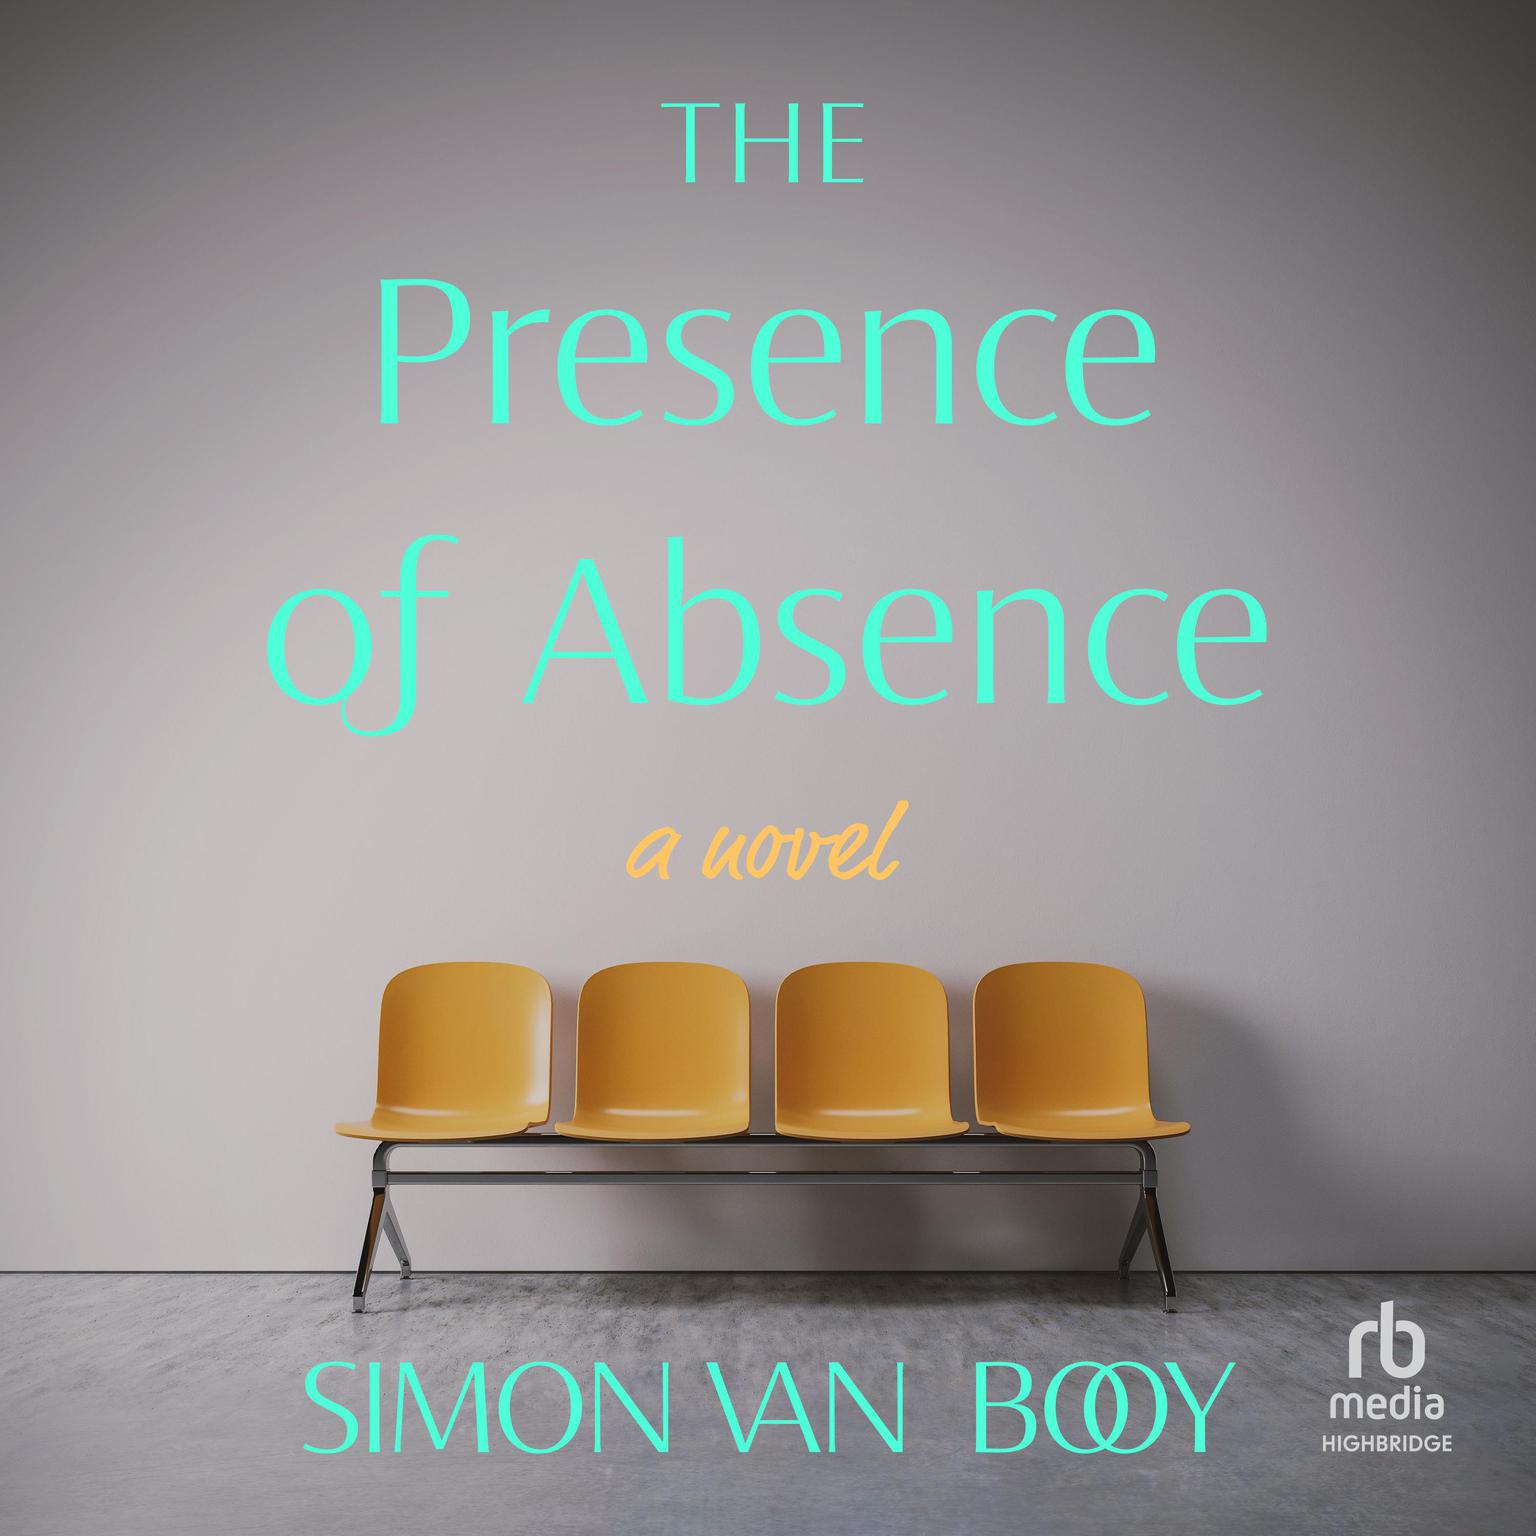 The Presence of Absence Audiobook, by Simon Van Booy